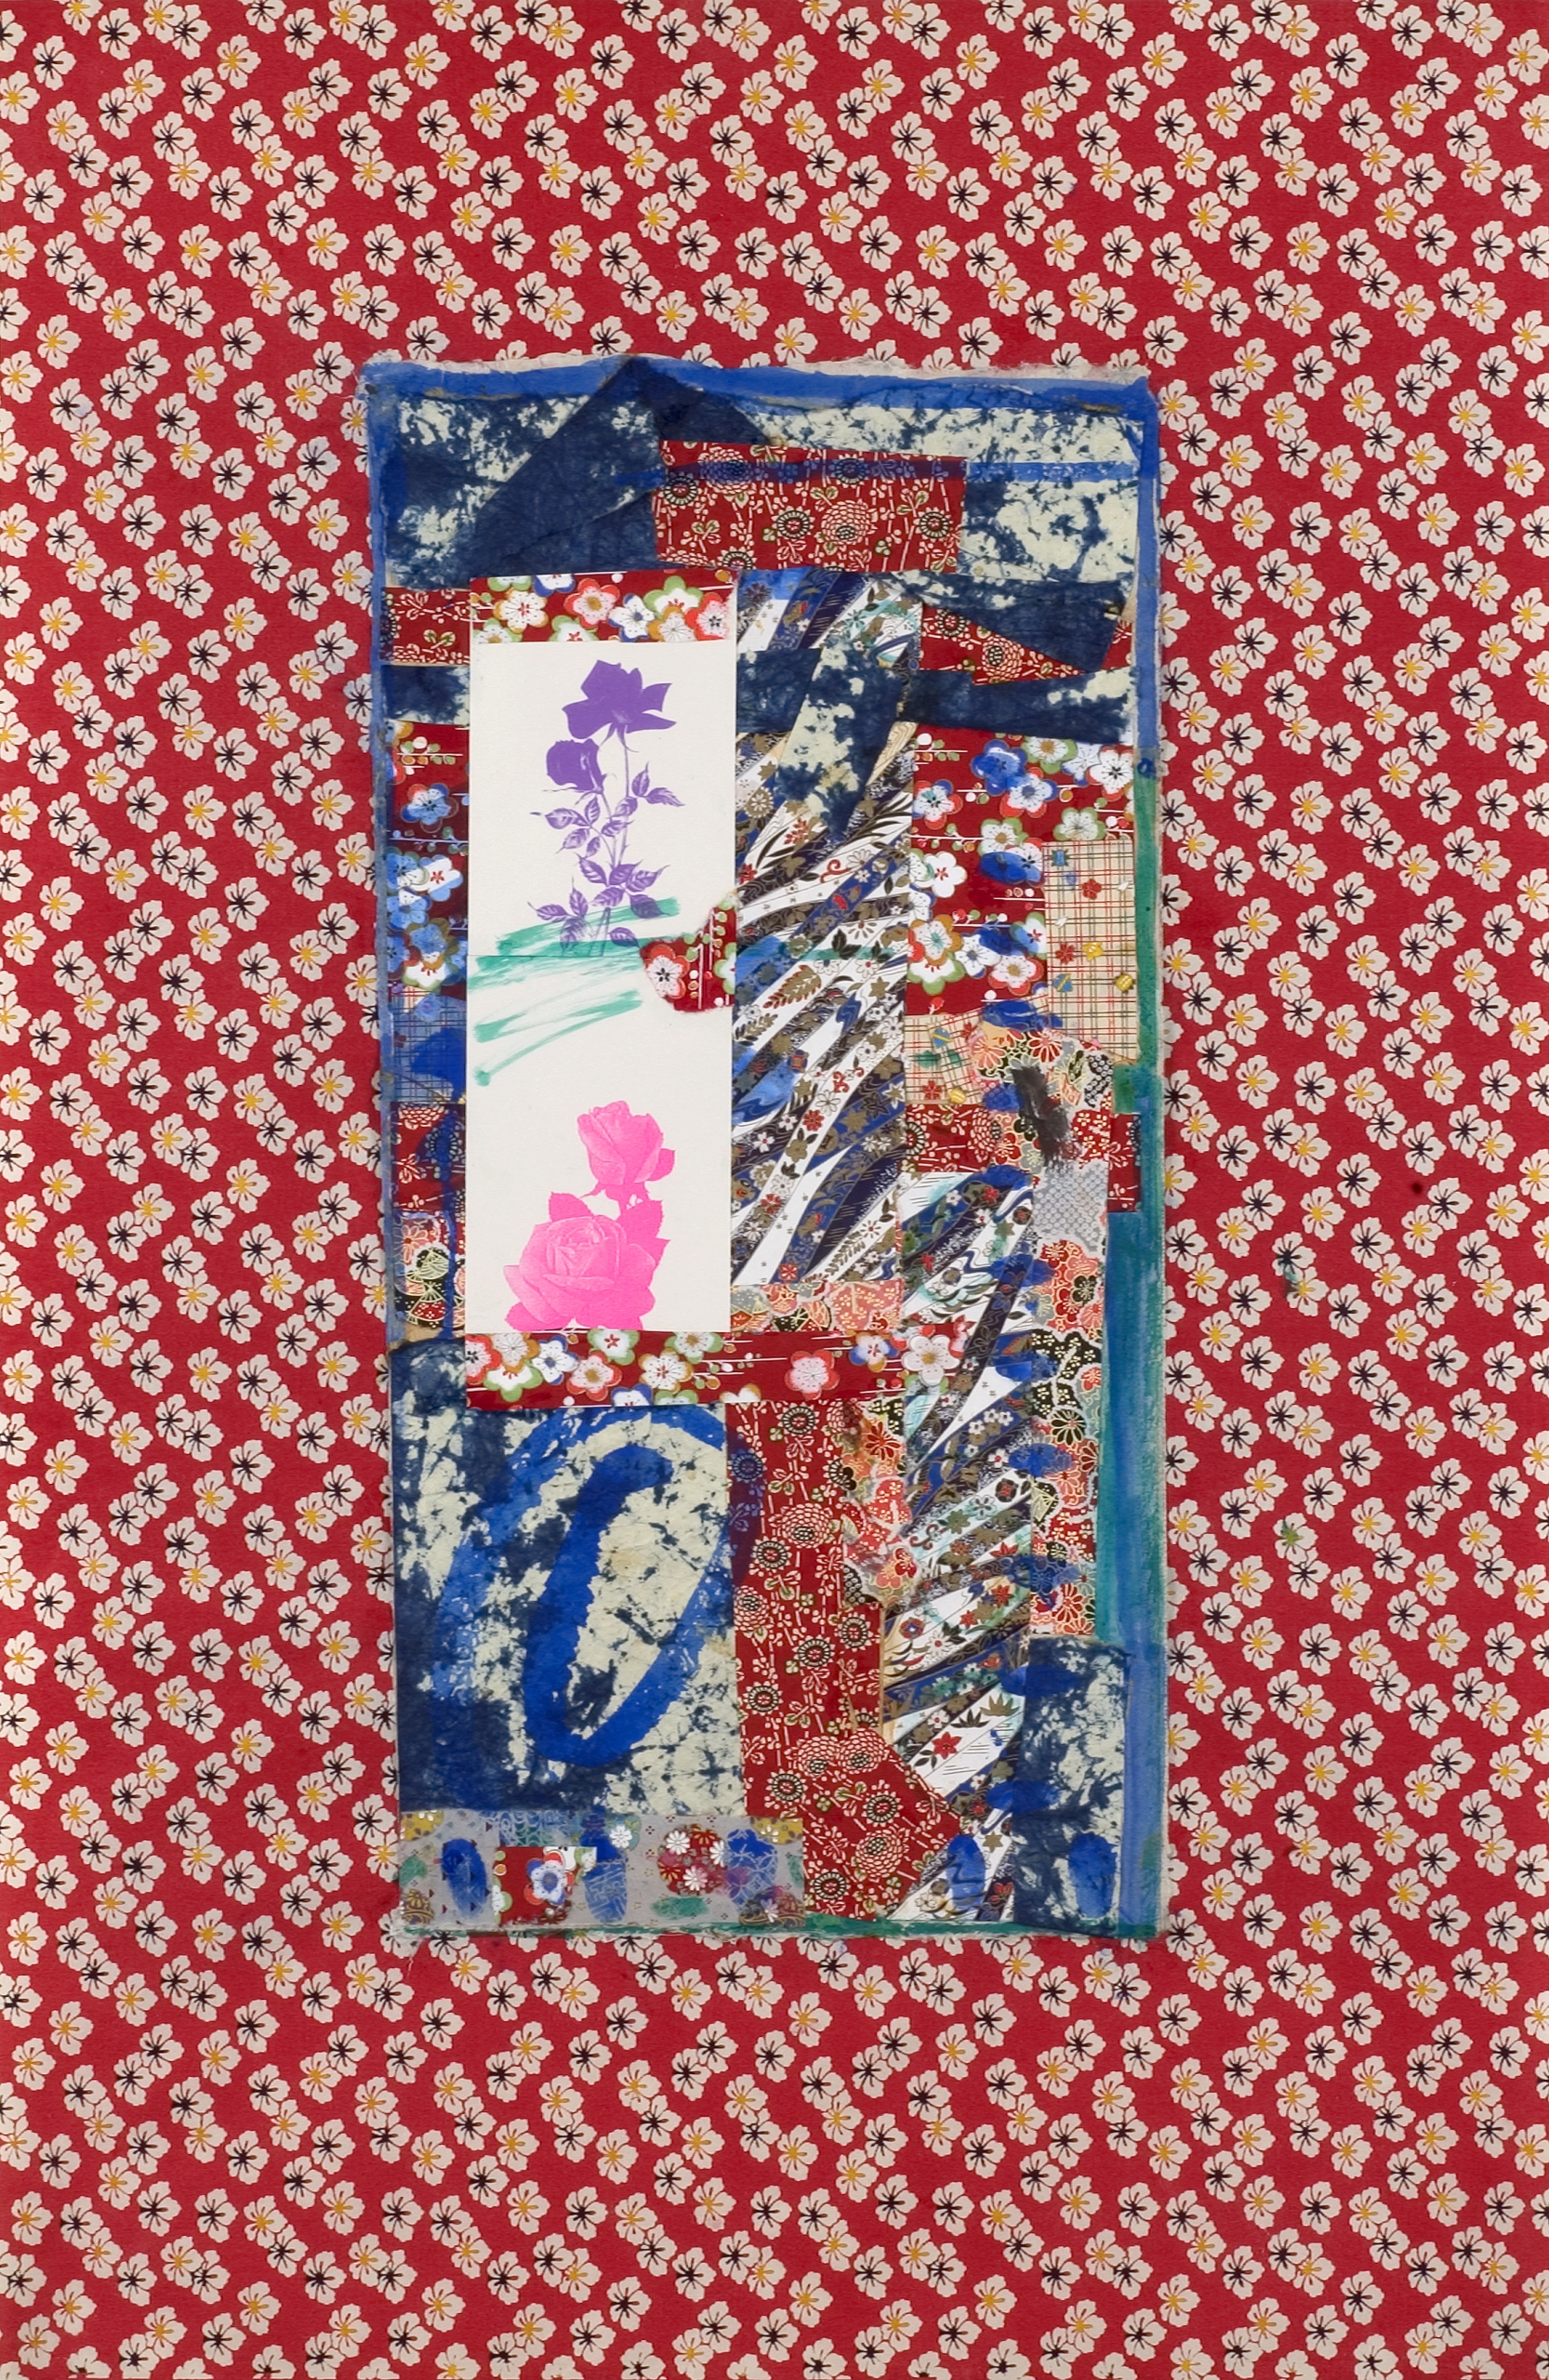 Weisel, Tohoku VI, 2012, Japanese papers, collage and paint, 50x28in.